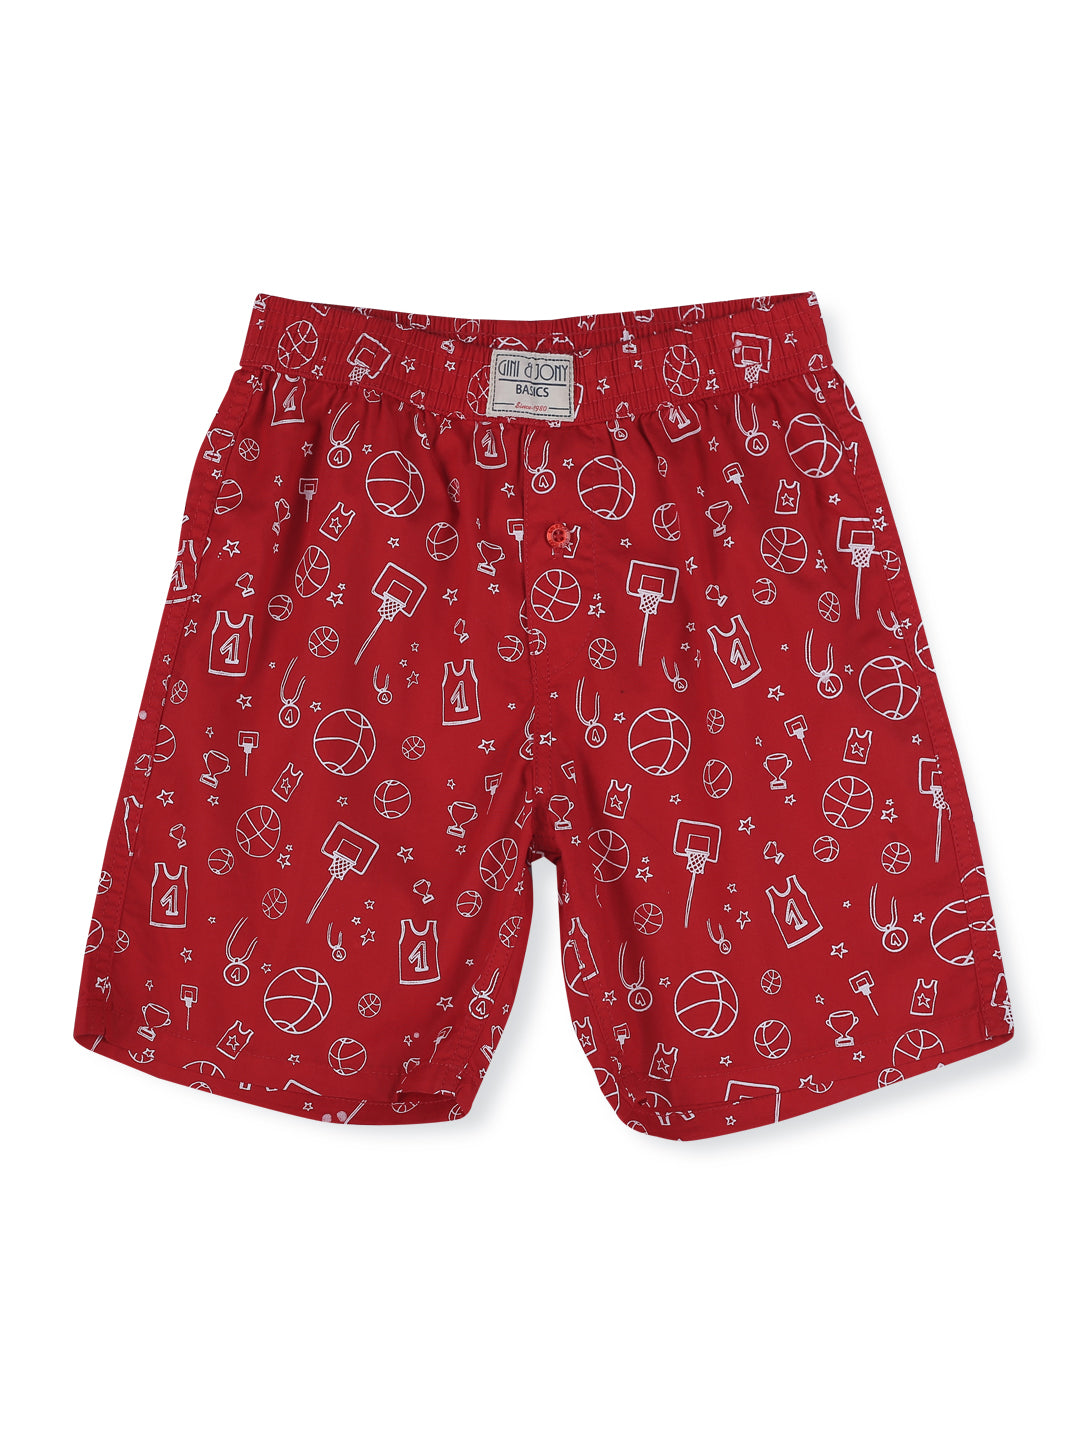 Boys Red Cotton Printed Boxer Shorts